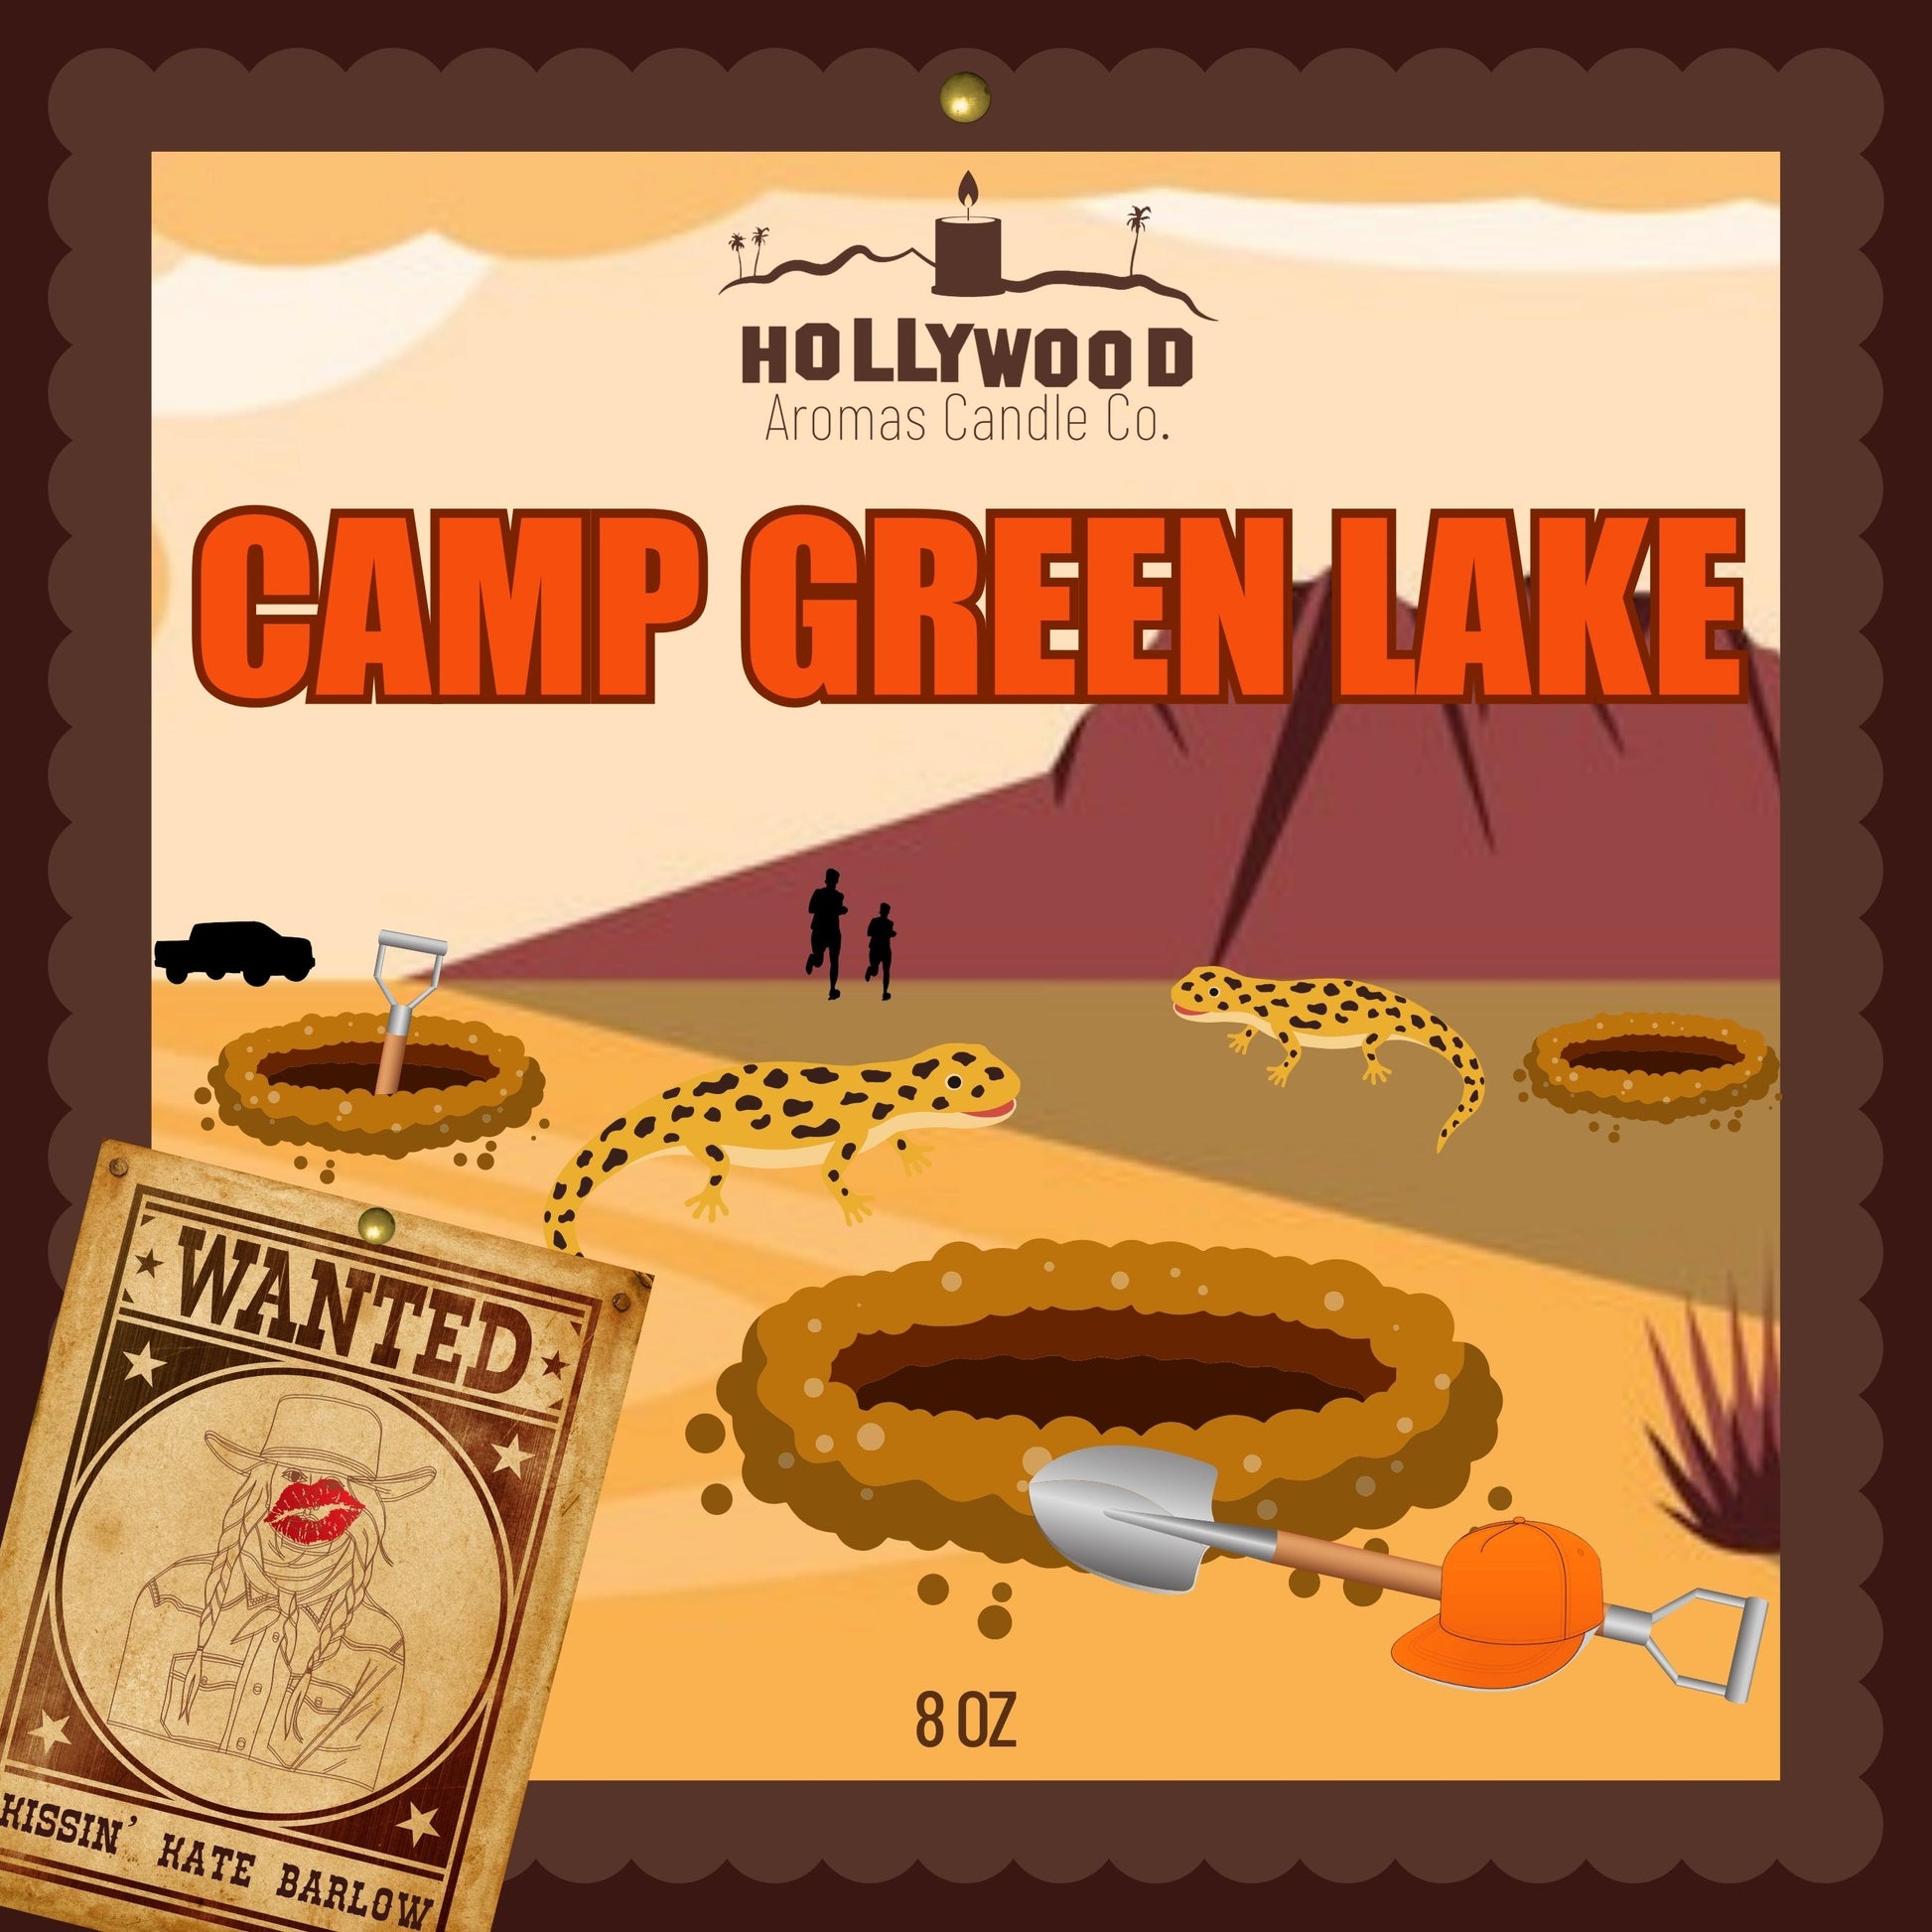 Holes Candle “Camp Green Lake” – Hollywood Aromas Candle Co.